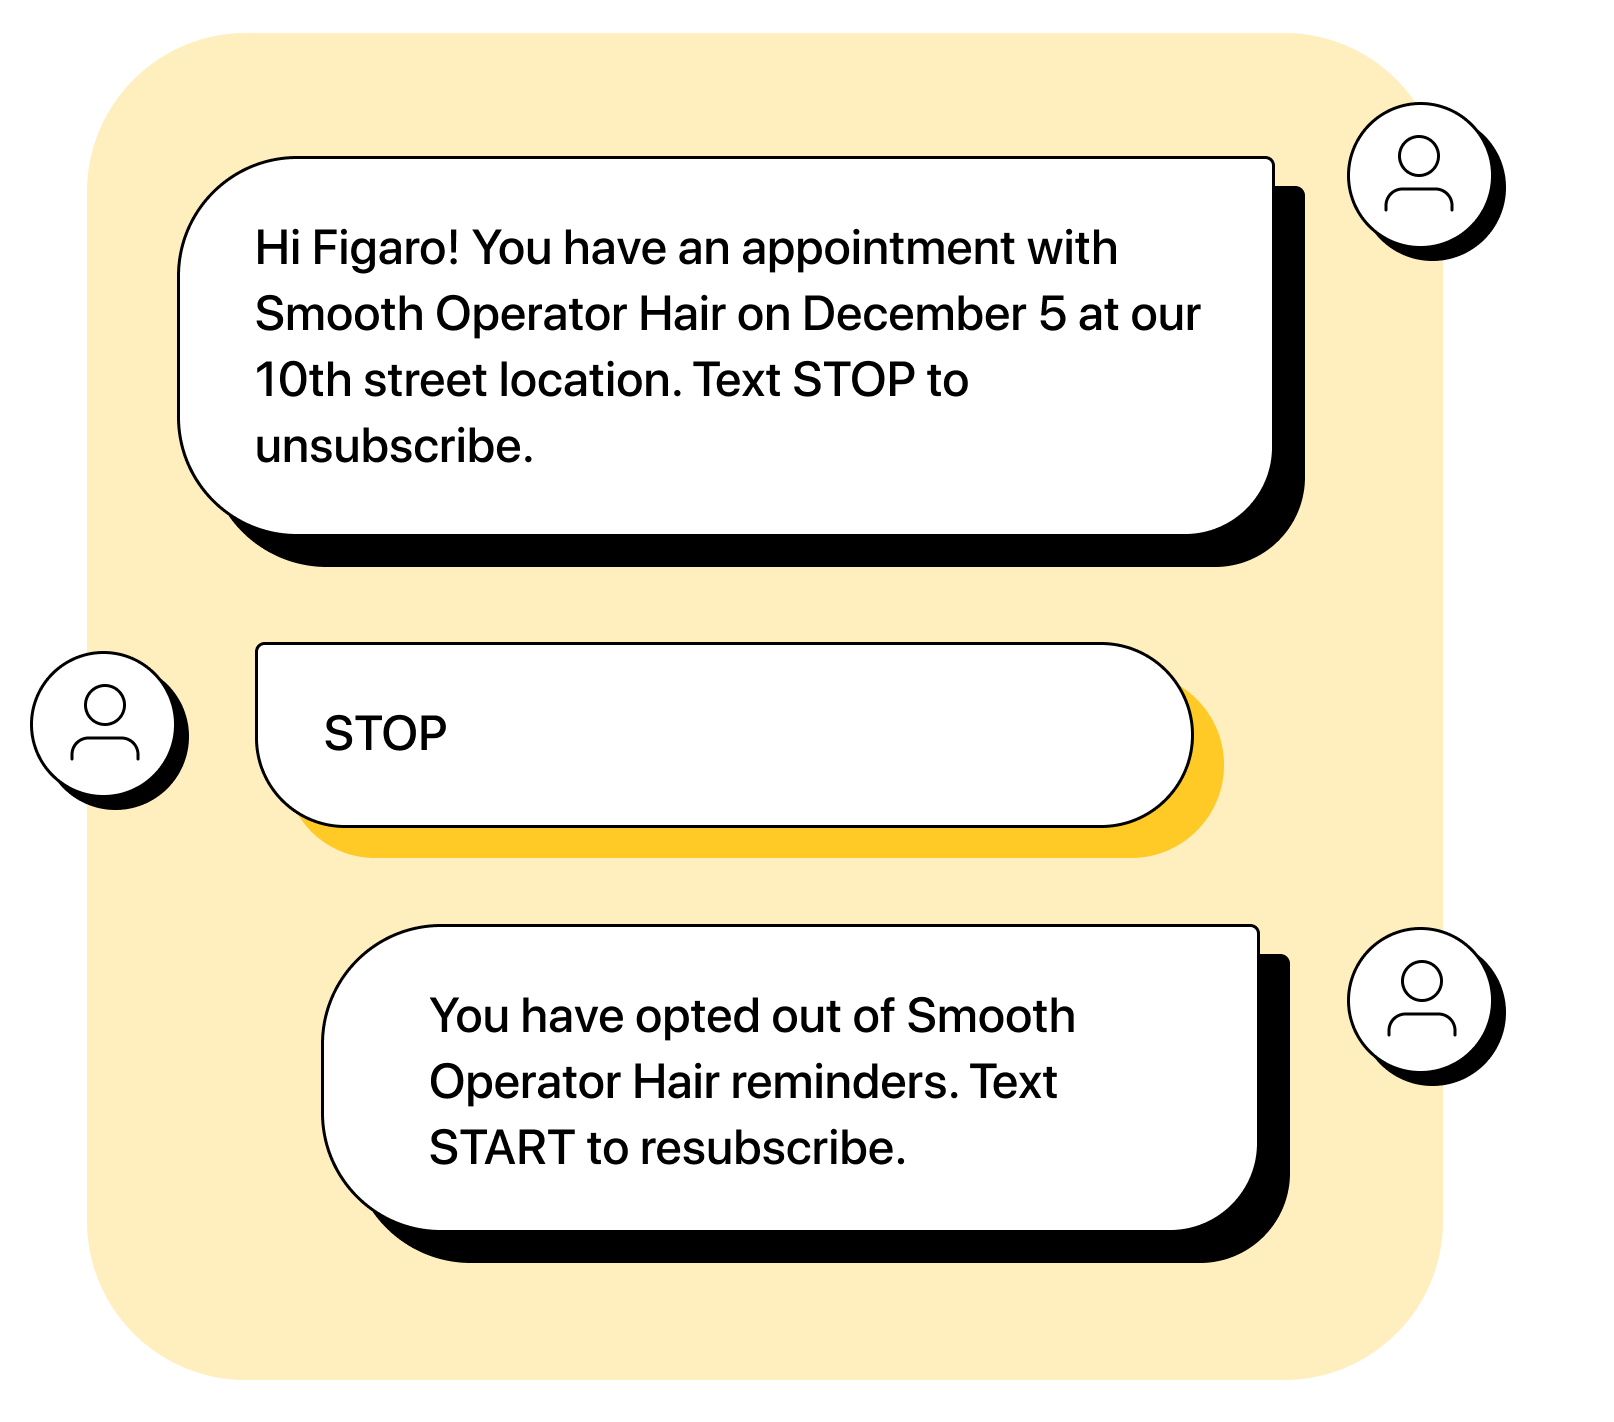 Business: Hi Figaro! You have an appointment with Smooth Operator Hair on December 5 at our 10th street location. Text END to unsubscribe. Figaro: END Business: You have opted out of Smooth Operator Hair reminders. Text START to resubscribe. 